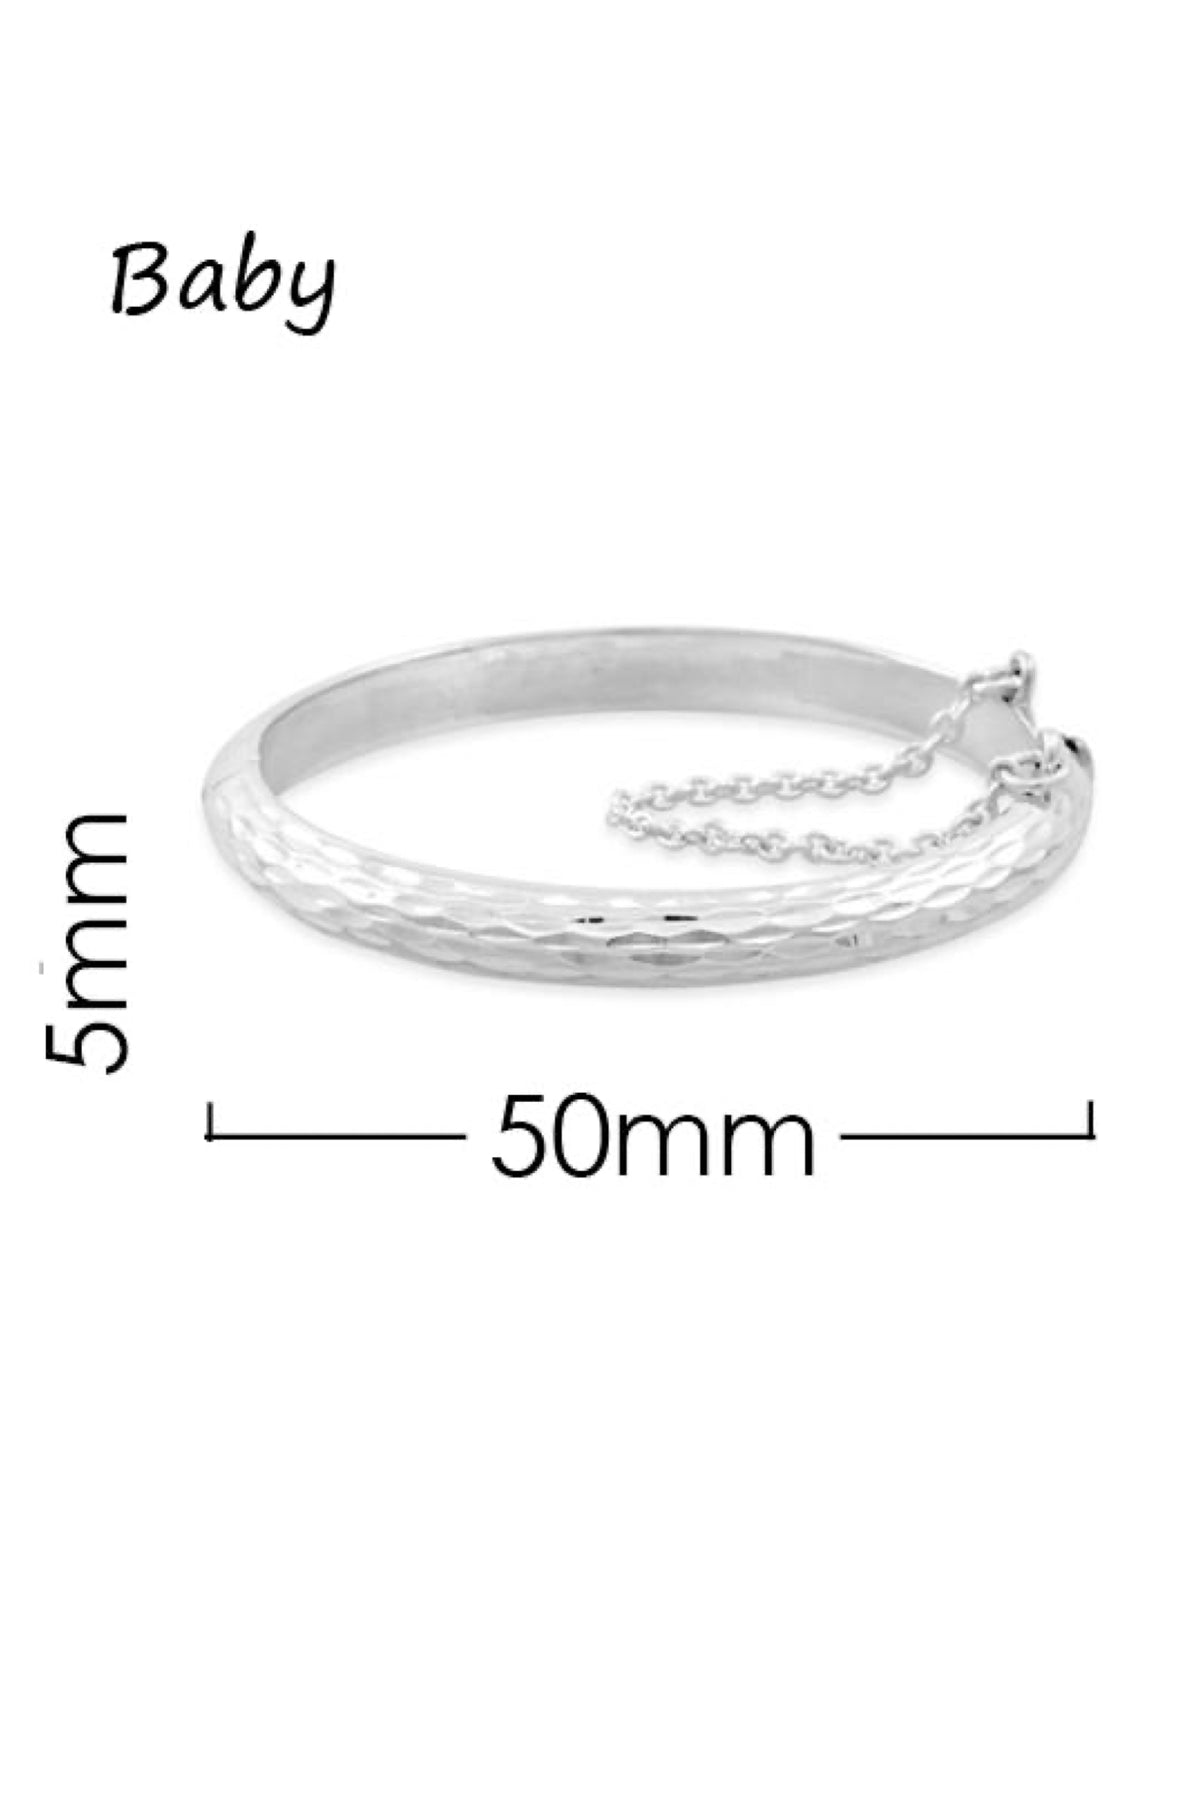 Pattened Sterling Silver Baby Bangle